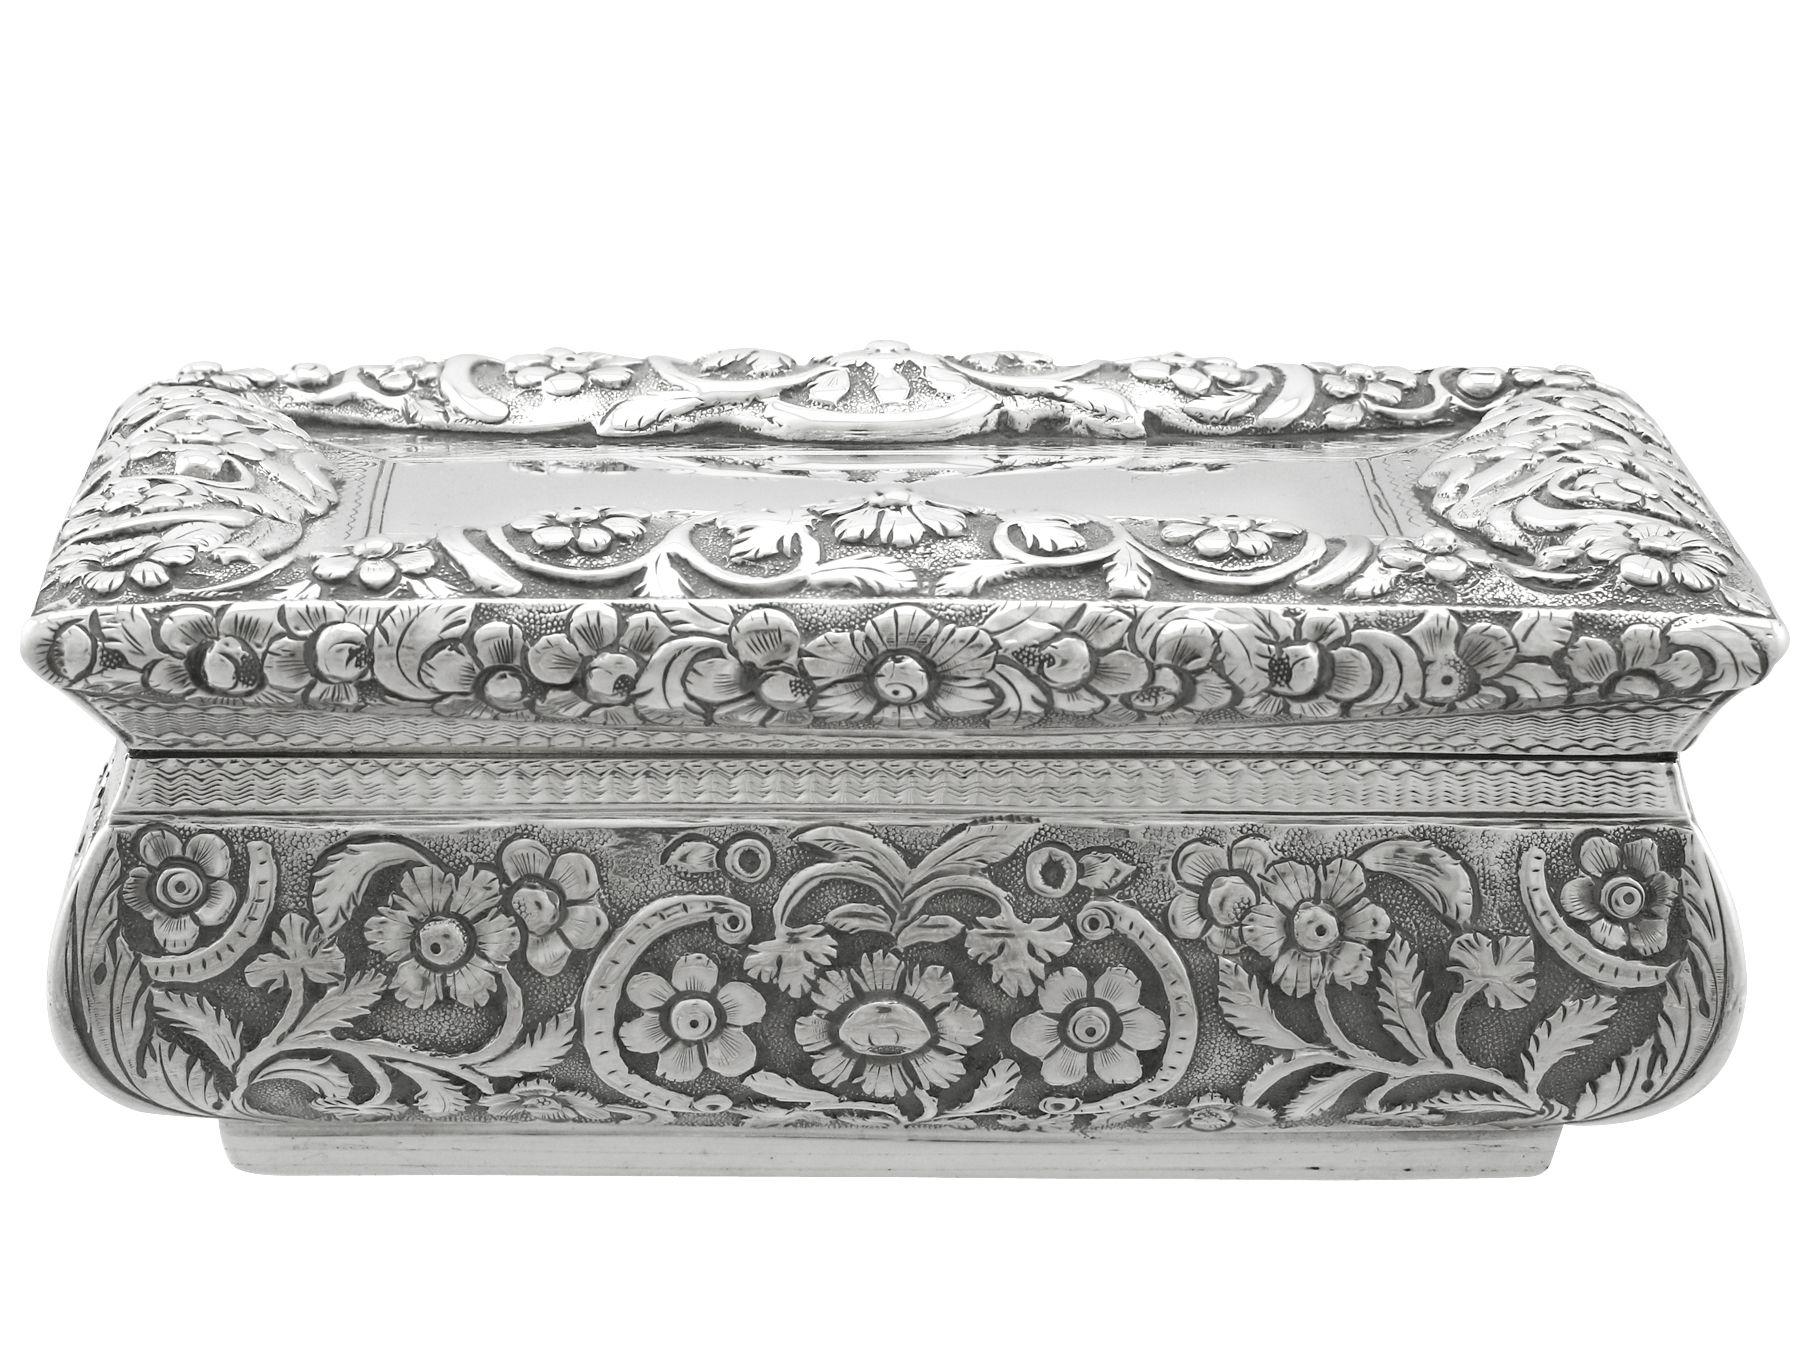 Antique William IV Sterling Silver Table Snuff Box In Excellent Condition For Sale In Jesmond, Newcastle Upon Tyne